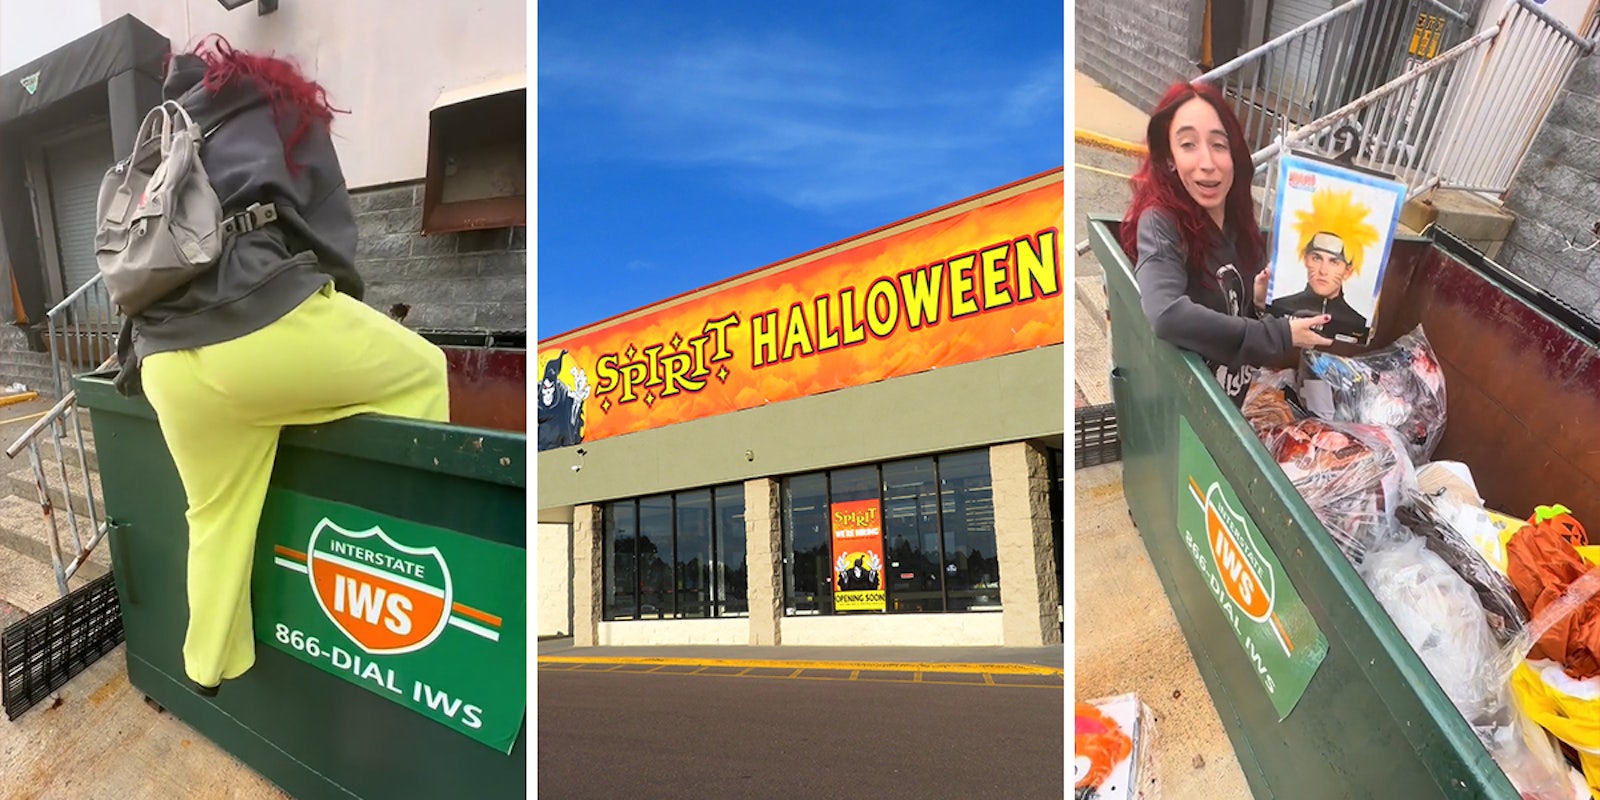 woman jumping into dumpster (l) Spirit Halloween sign on building (c) woman in dumpster holding Naruto wig (r)